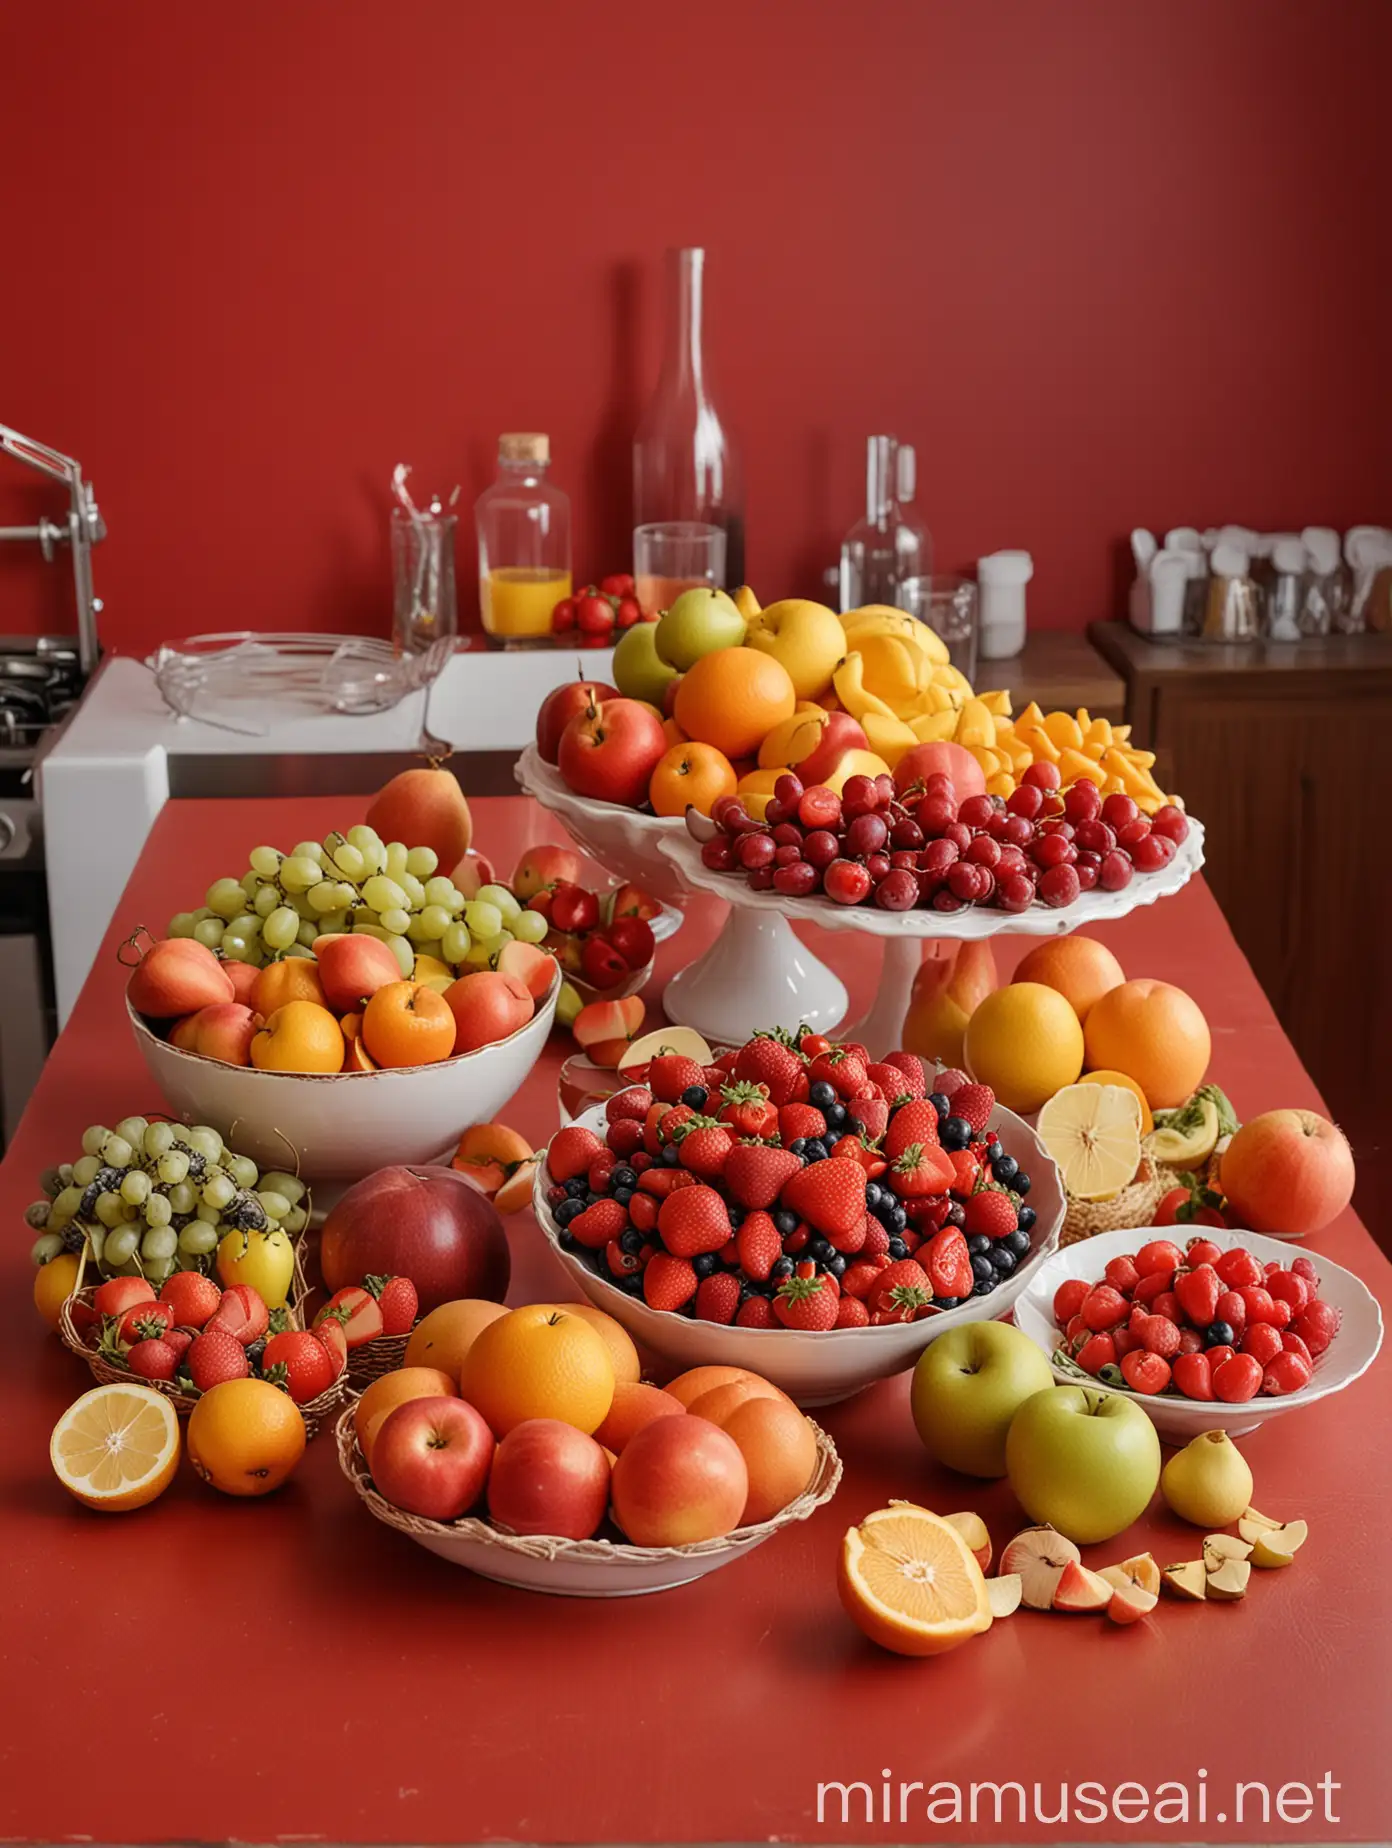 Assorted Fruits CloseUp on Red Kitchen Table